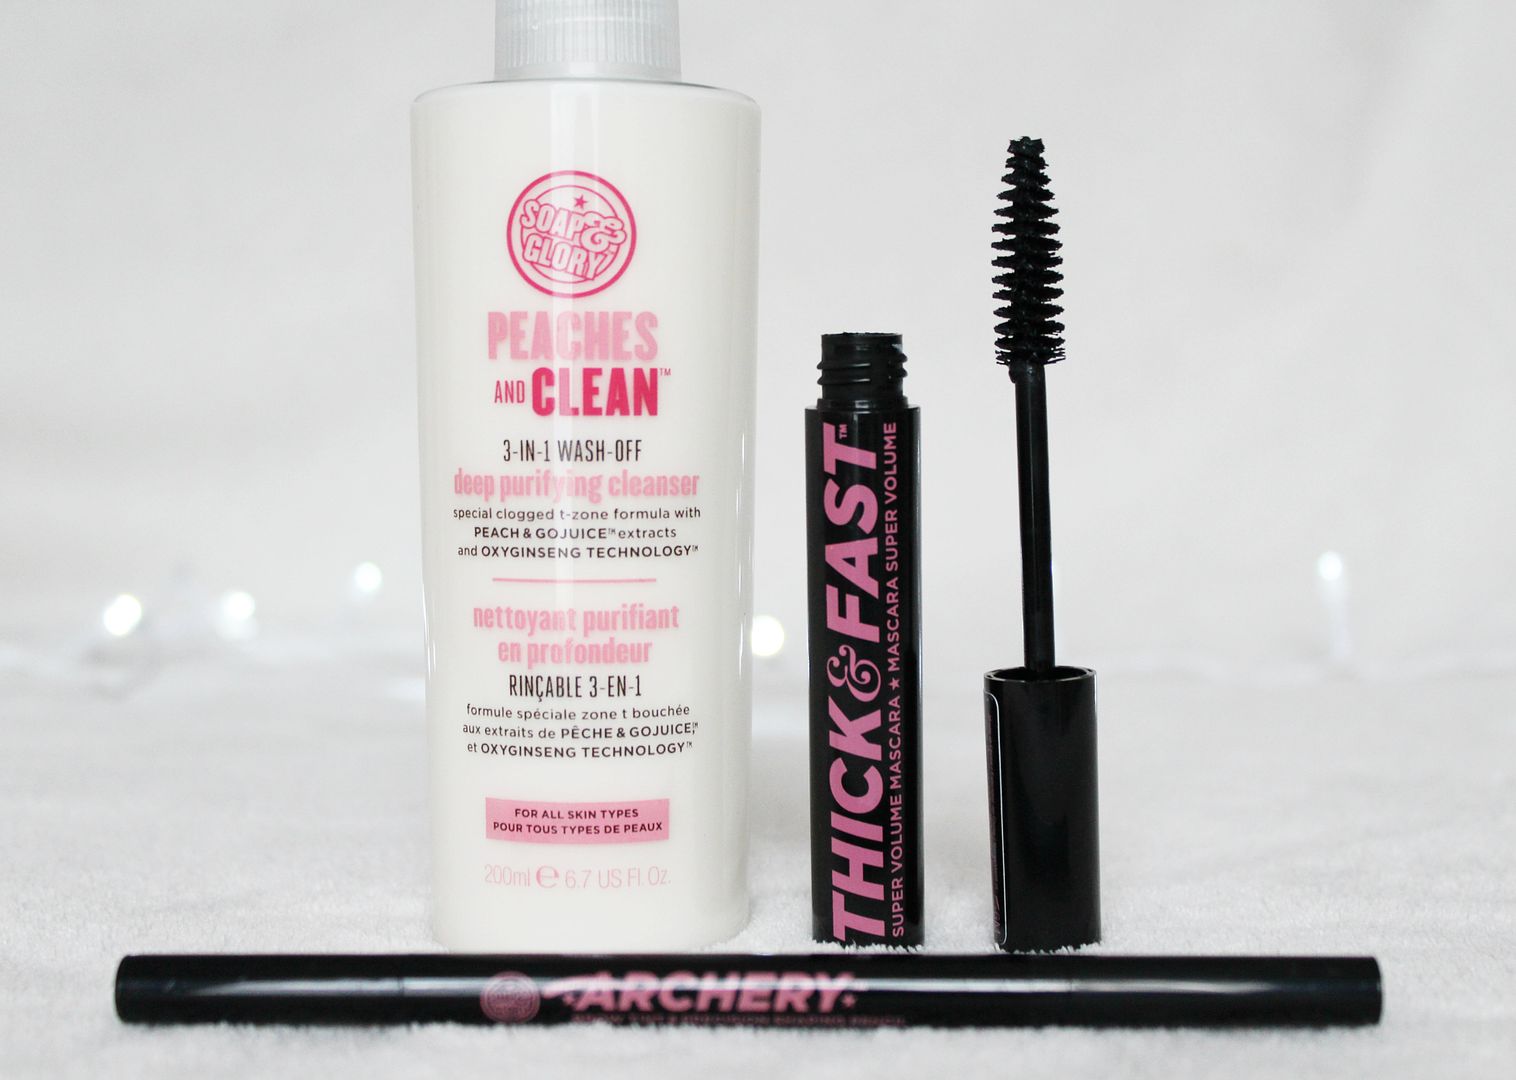 Soap And Glory Beauty Haul Winter 2015 Peaches And Clean Thick And Fast Mascara Super Jet Black Archery Brow Tint Pencil Brownie Points Belle-Amie UK Beauty Fashion Lifestyle Blog